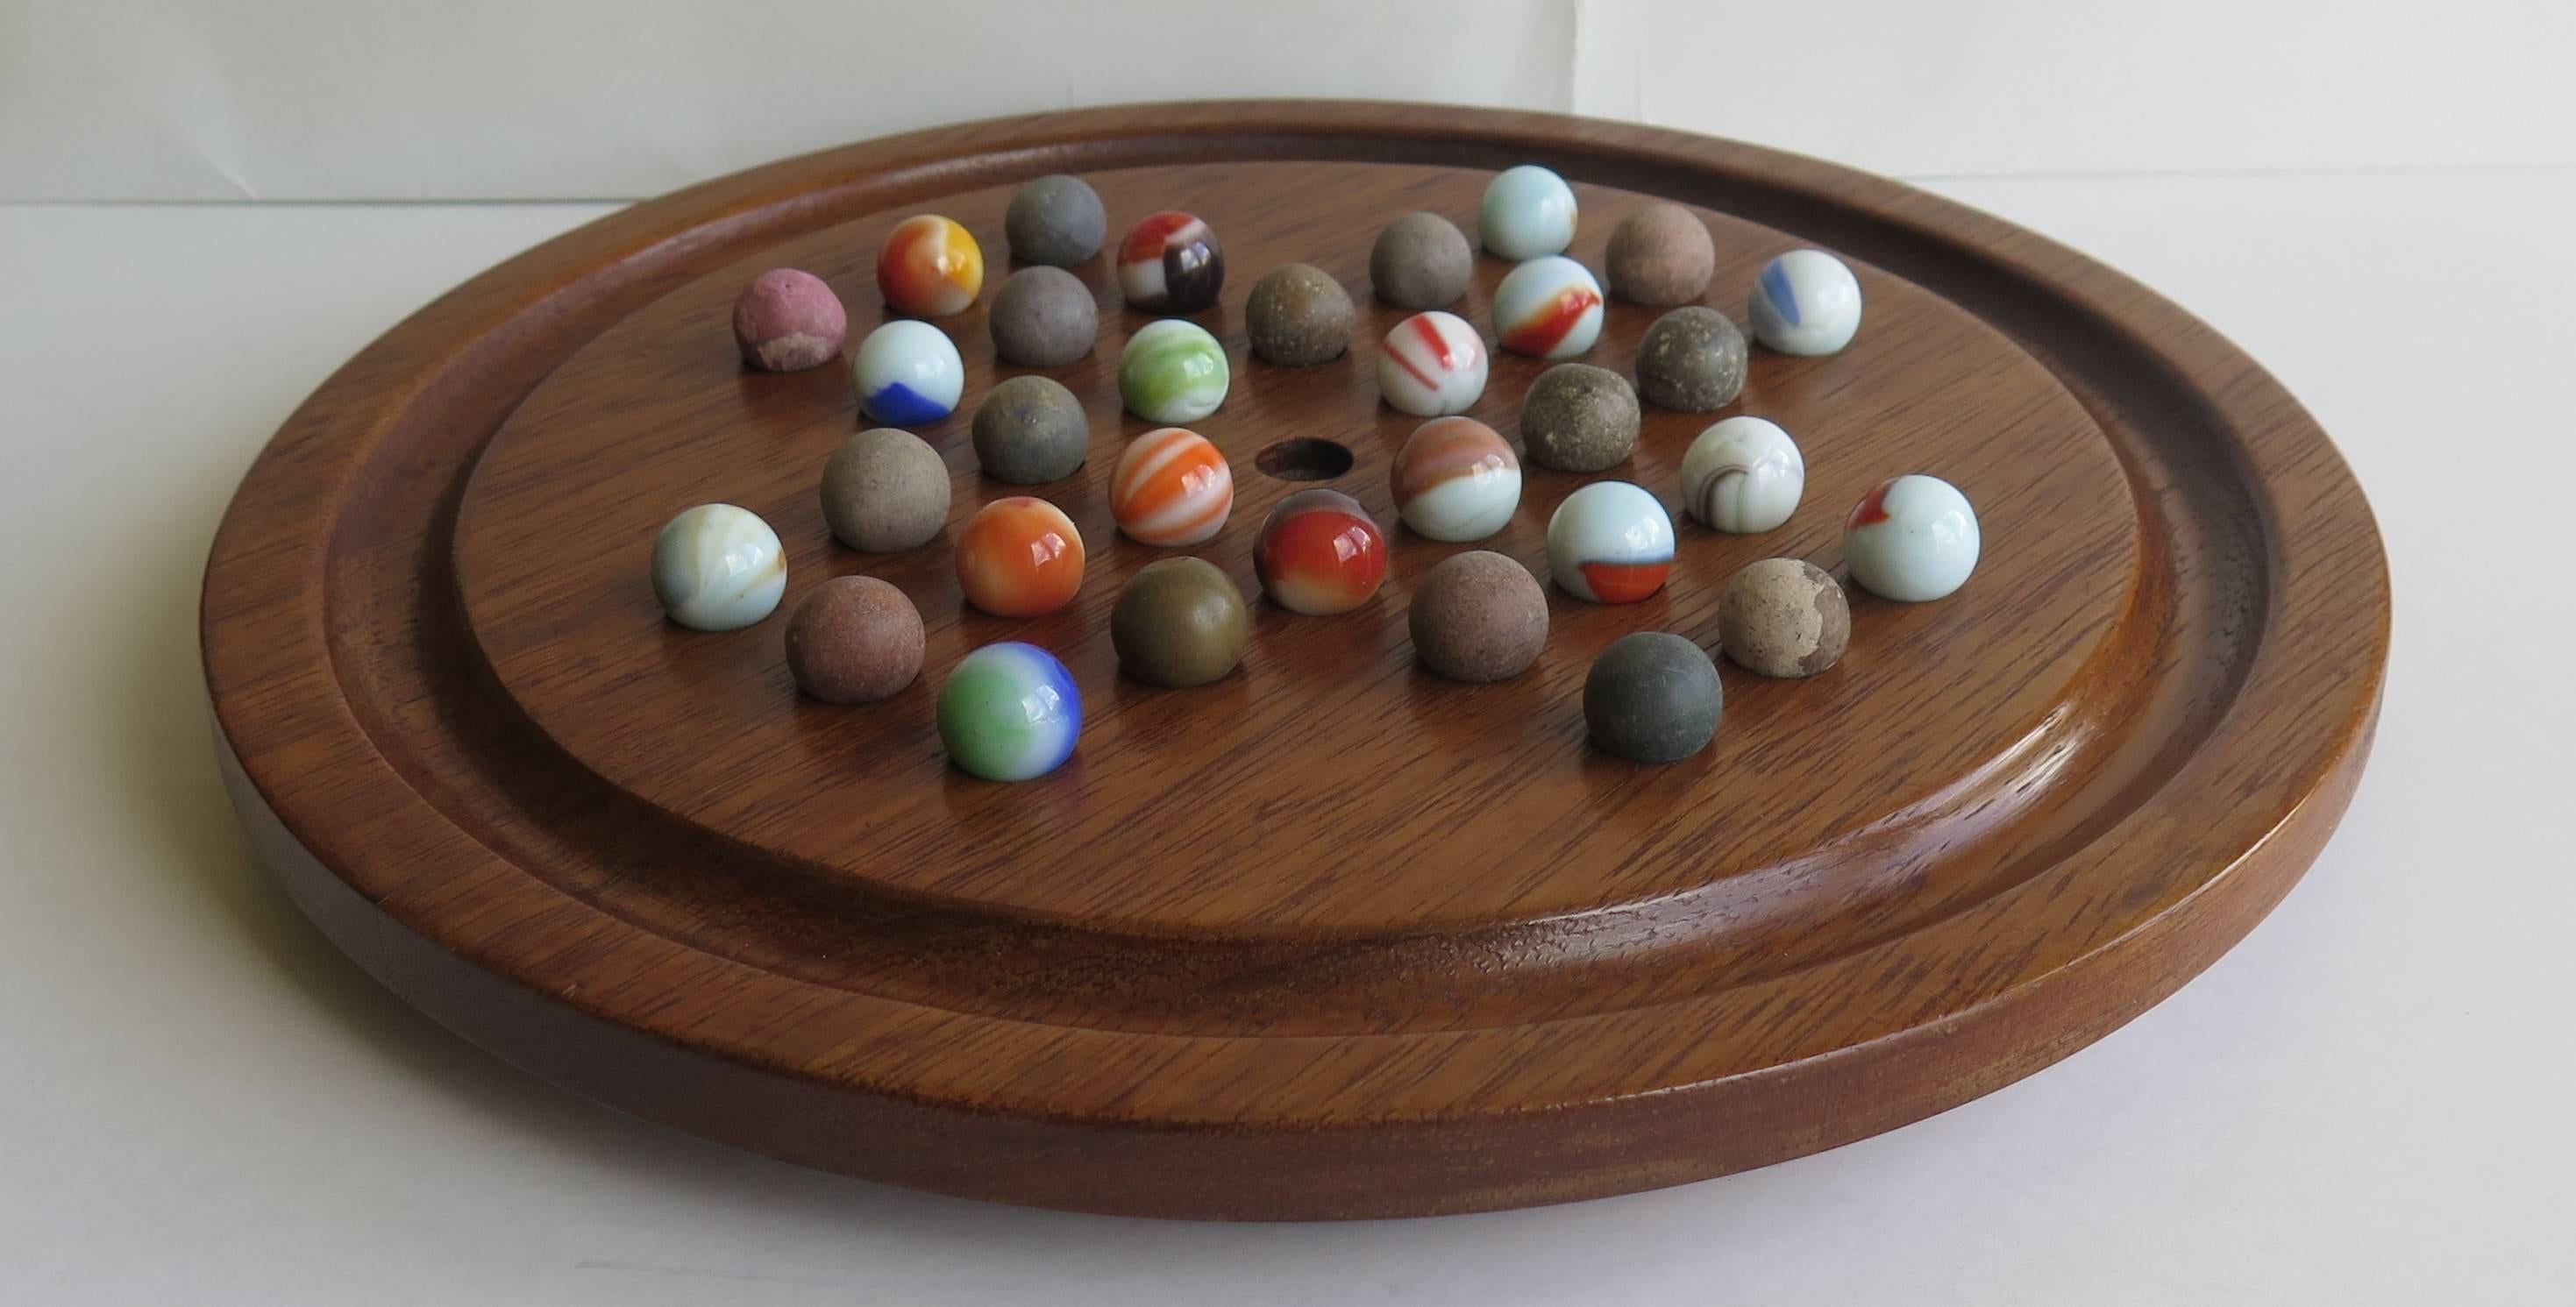 Hand-Crafted 19th Century Table Marble Solitaire Board Game, Early Handmade Marbles